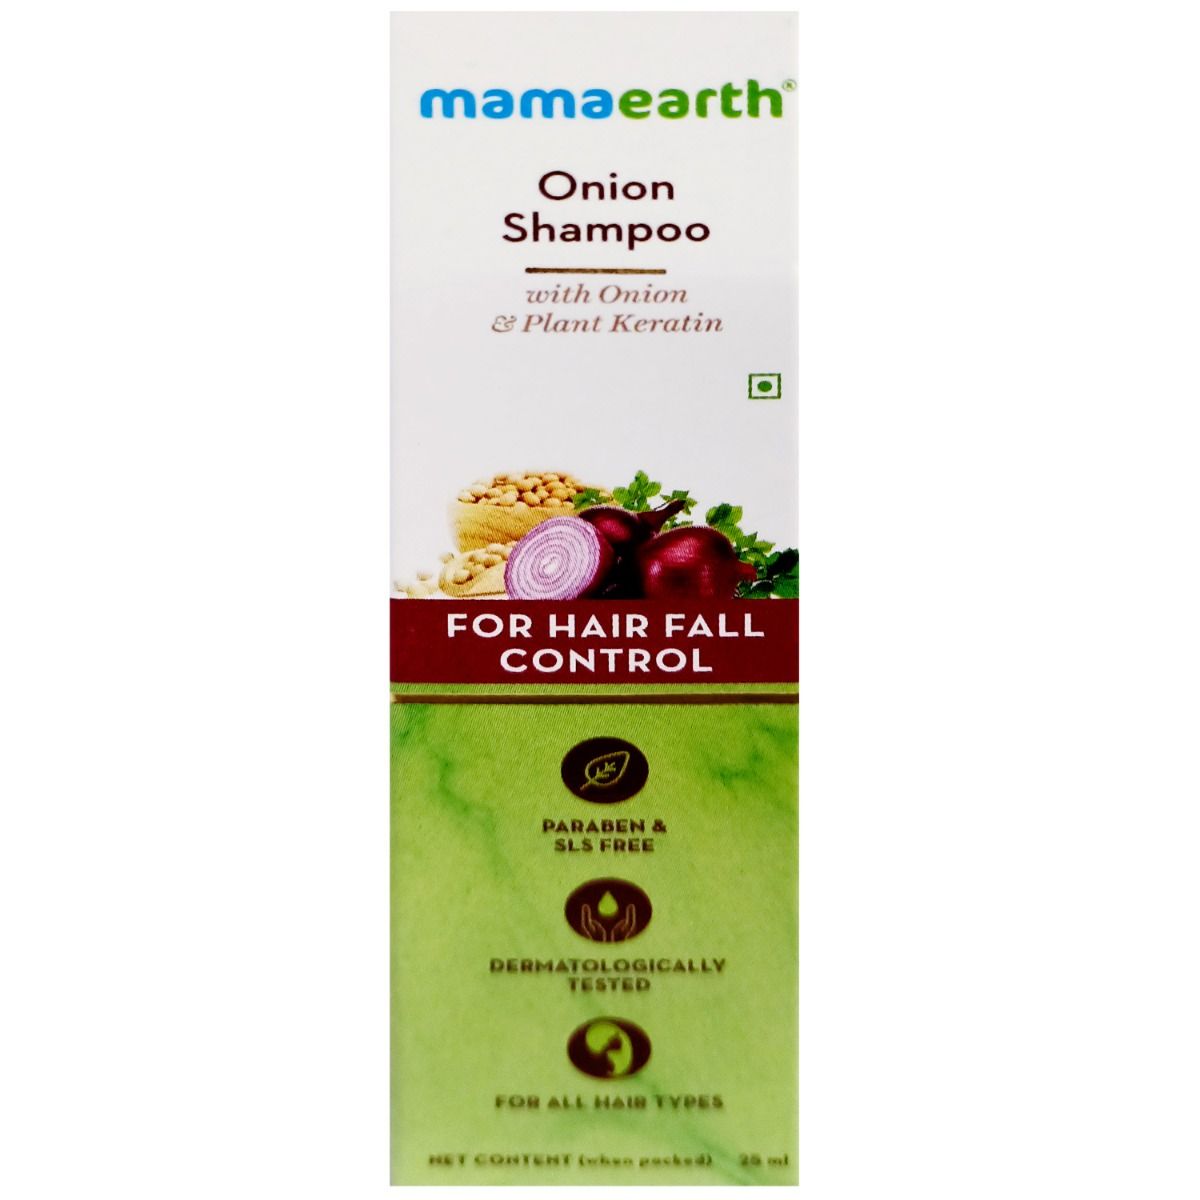 Mamaearth Onion Shampoo For Hair Fall Control, 25 ml Price, Uses, Side  Effects, Composition - Apollo Pharmacy